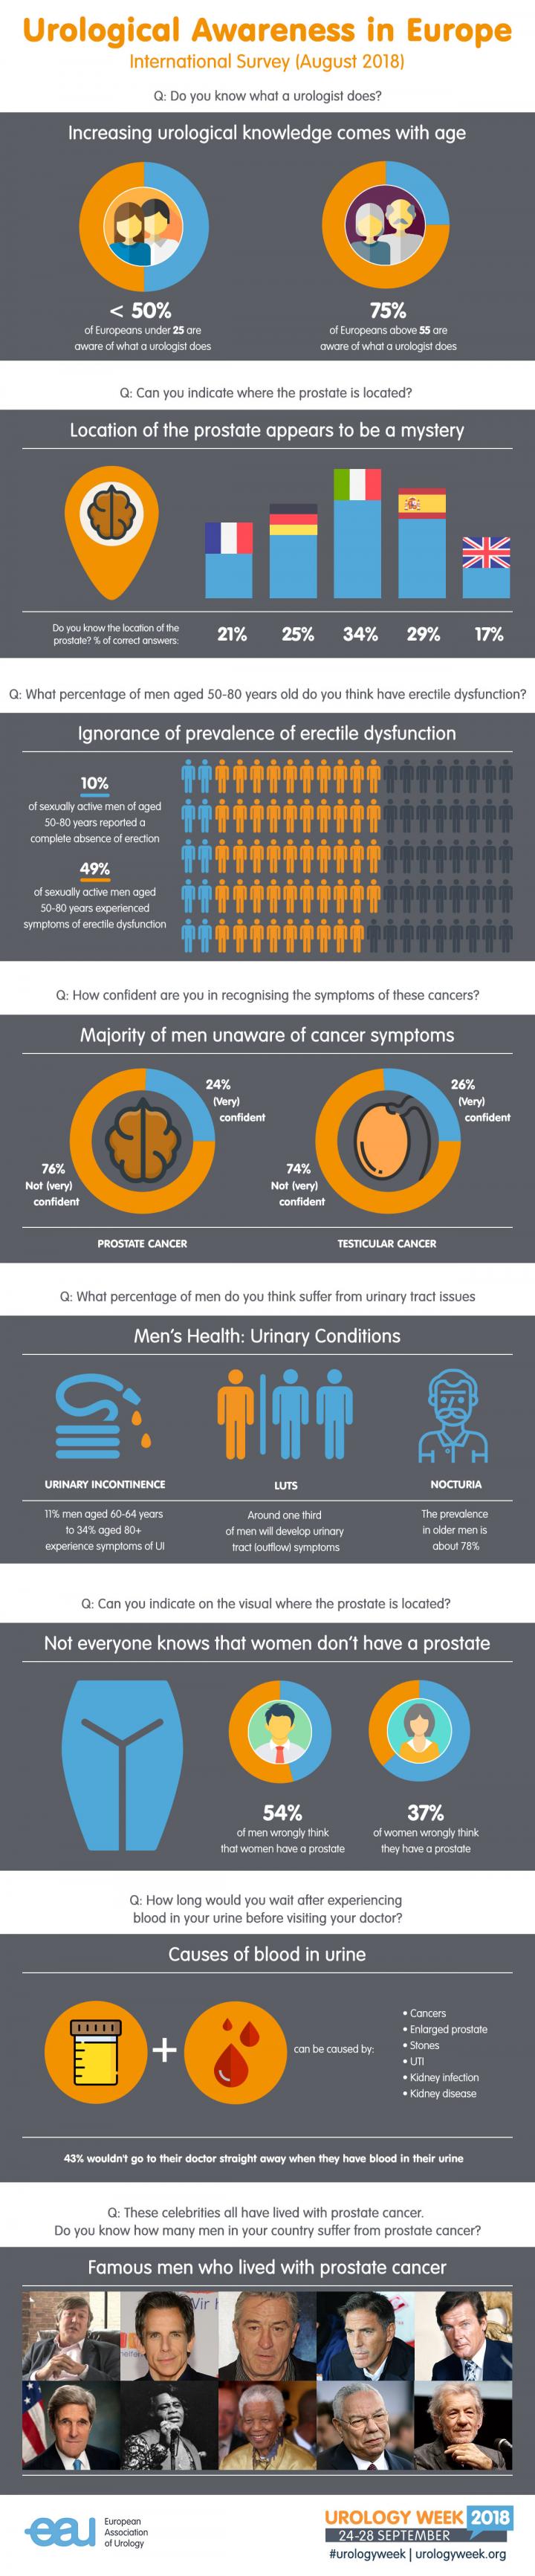 Infographic -- Urological Awareness in Europe